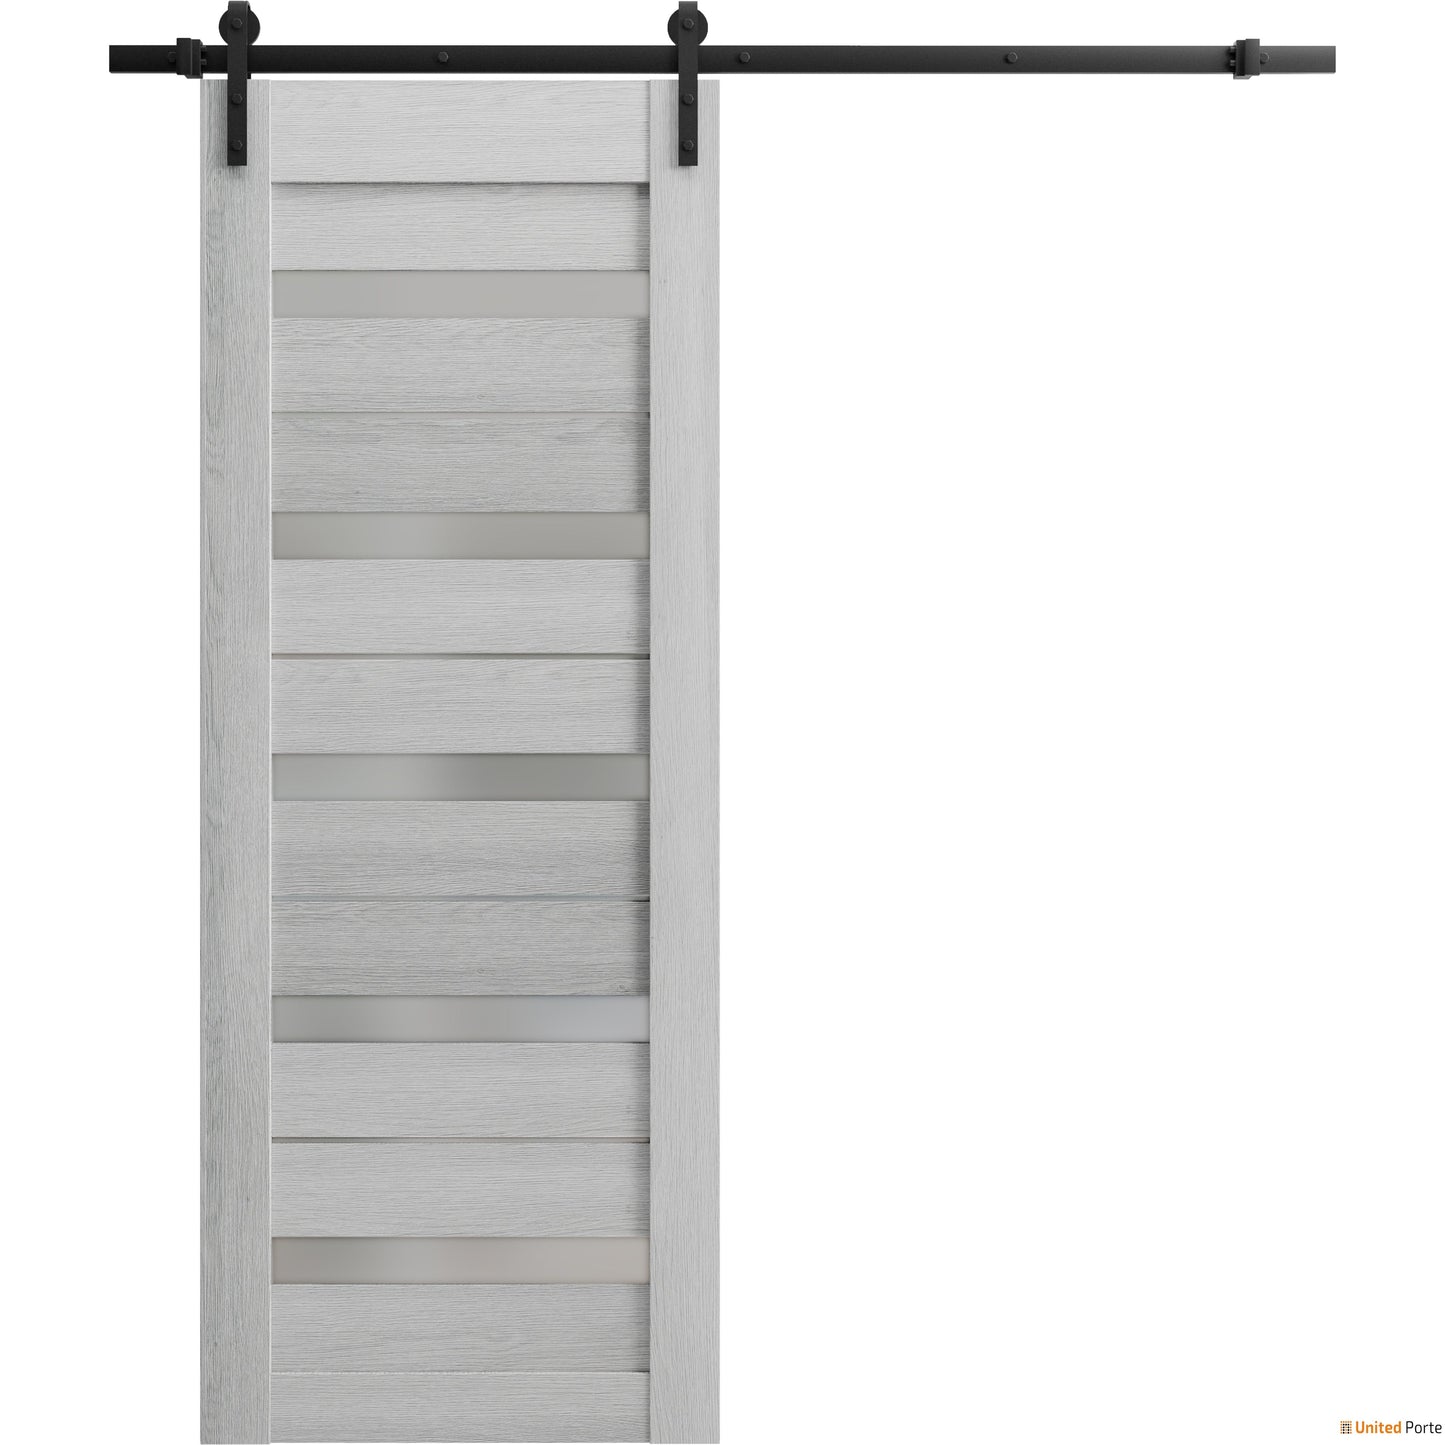 Quadro 4445 Light Grey Oak Barn Door with Frosted Glass and Black Rail